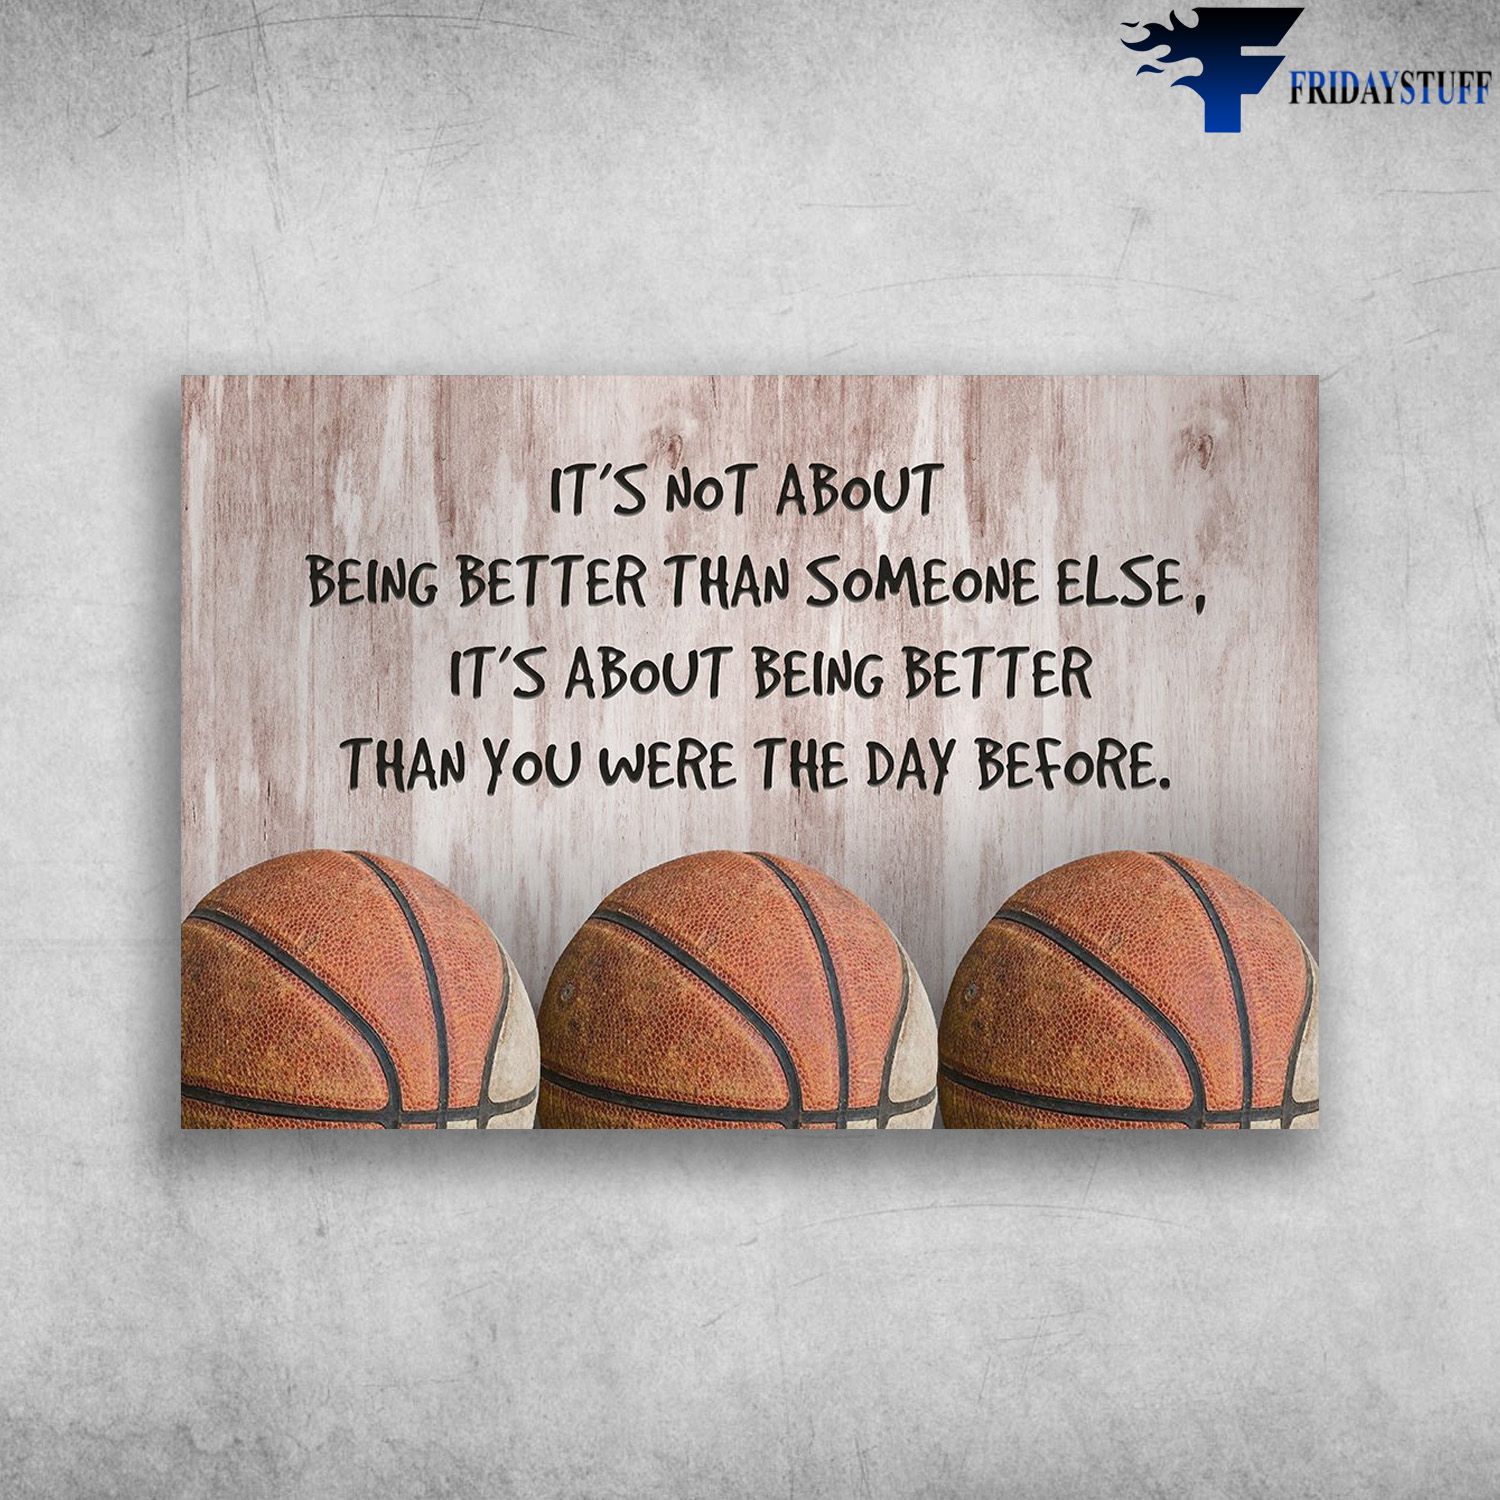 The Basketball - It's Not About Being Better Than Someone Else, It's About Being Better Than You Were The Day Before